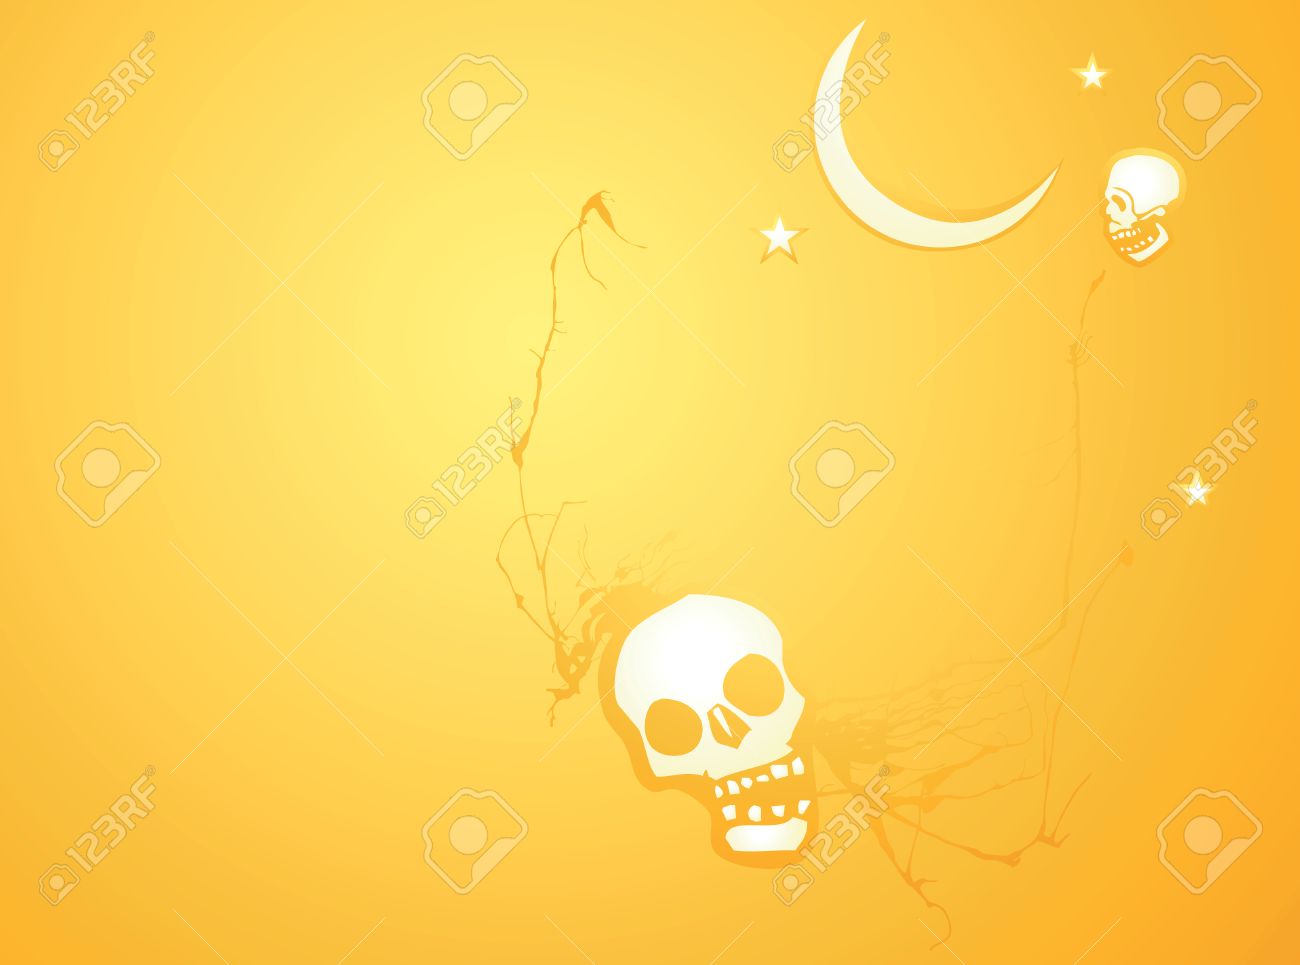 Softly Orange Colored Desktop Background Halloween Themed With